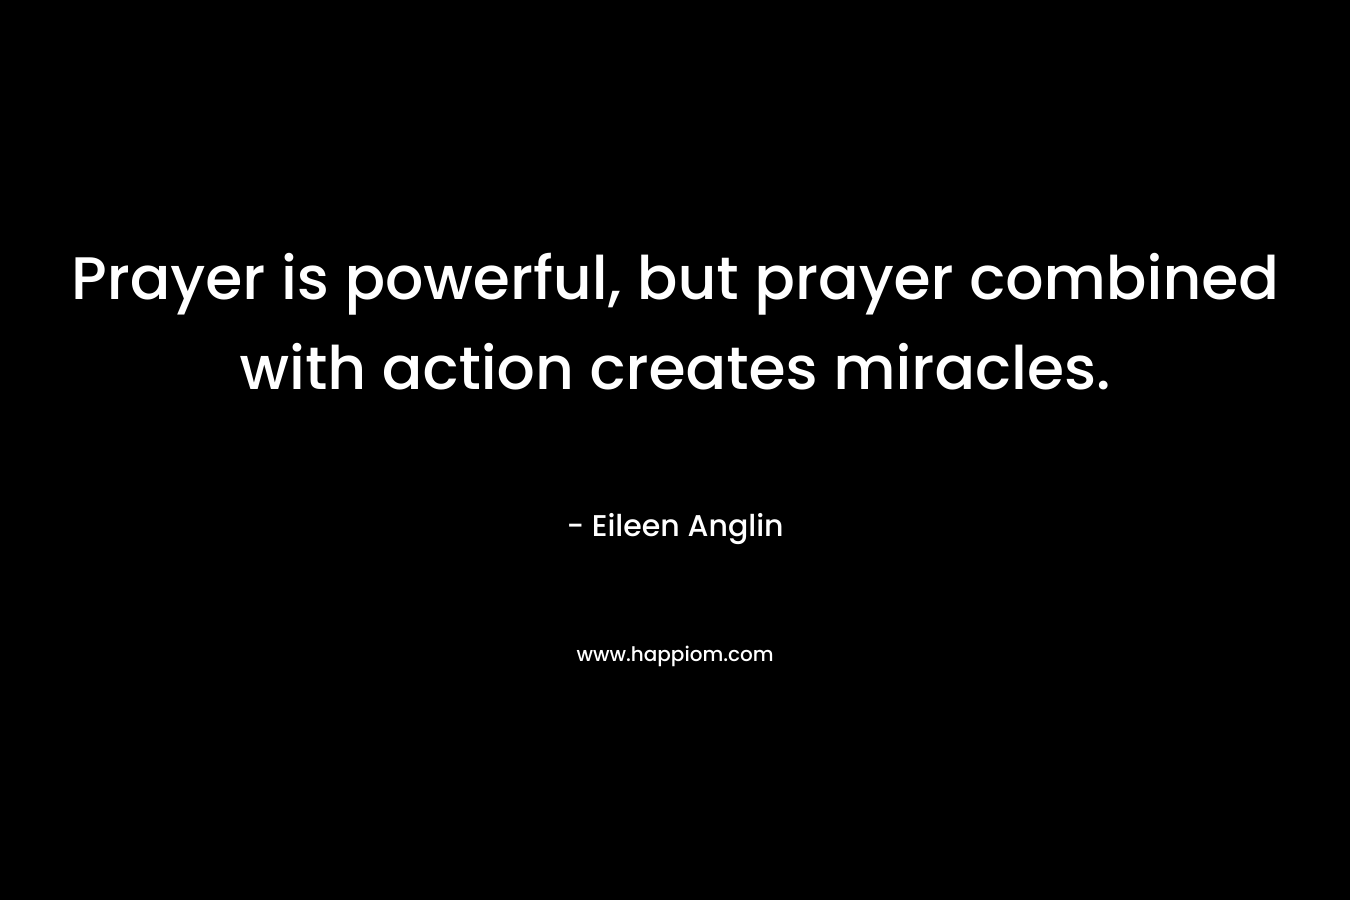 Prayer is powerful, but prayer combined with action creates miracles.